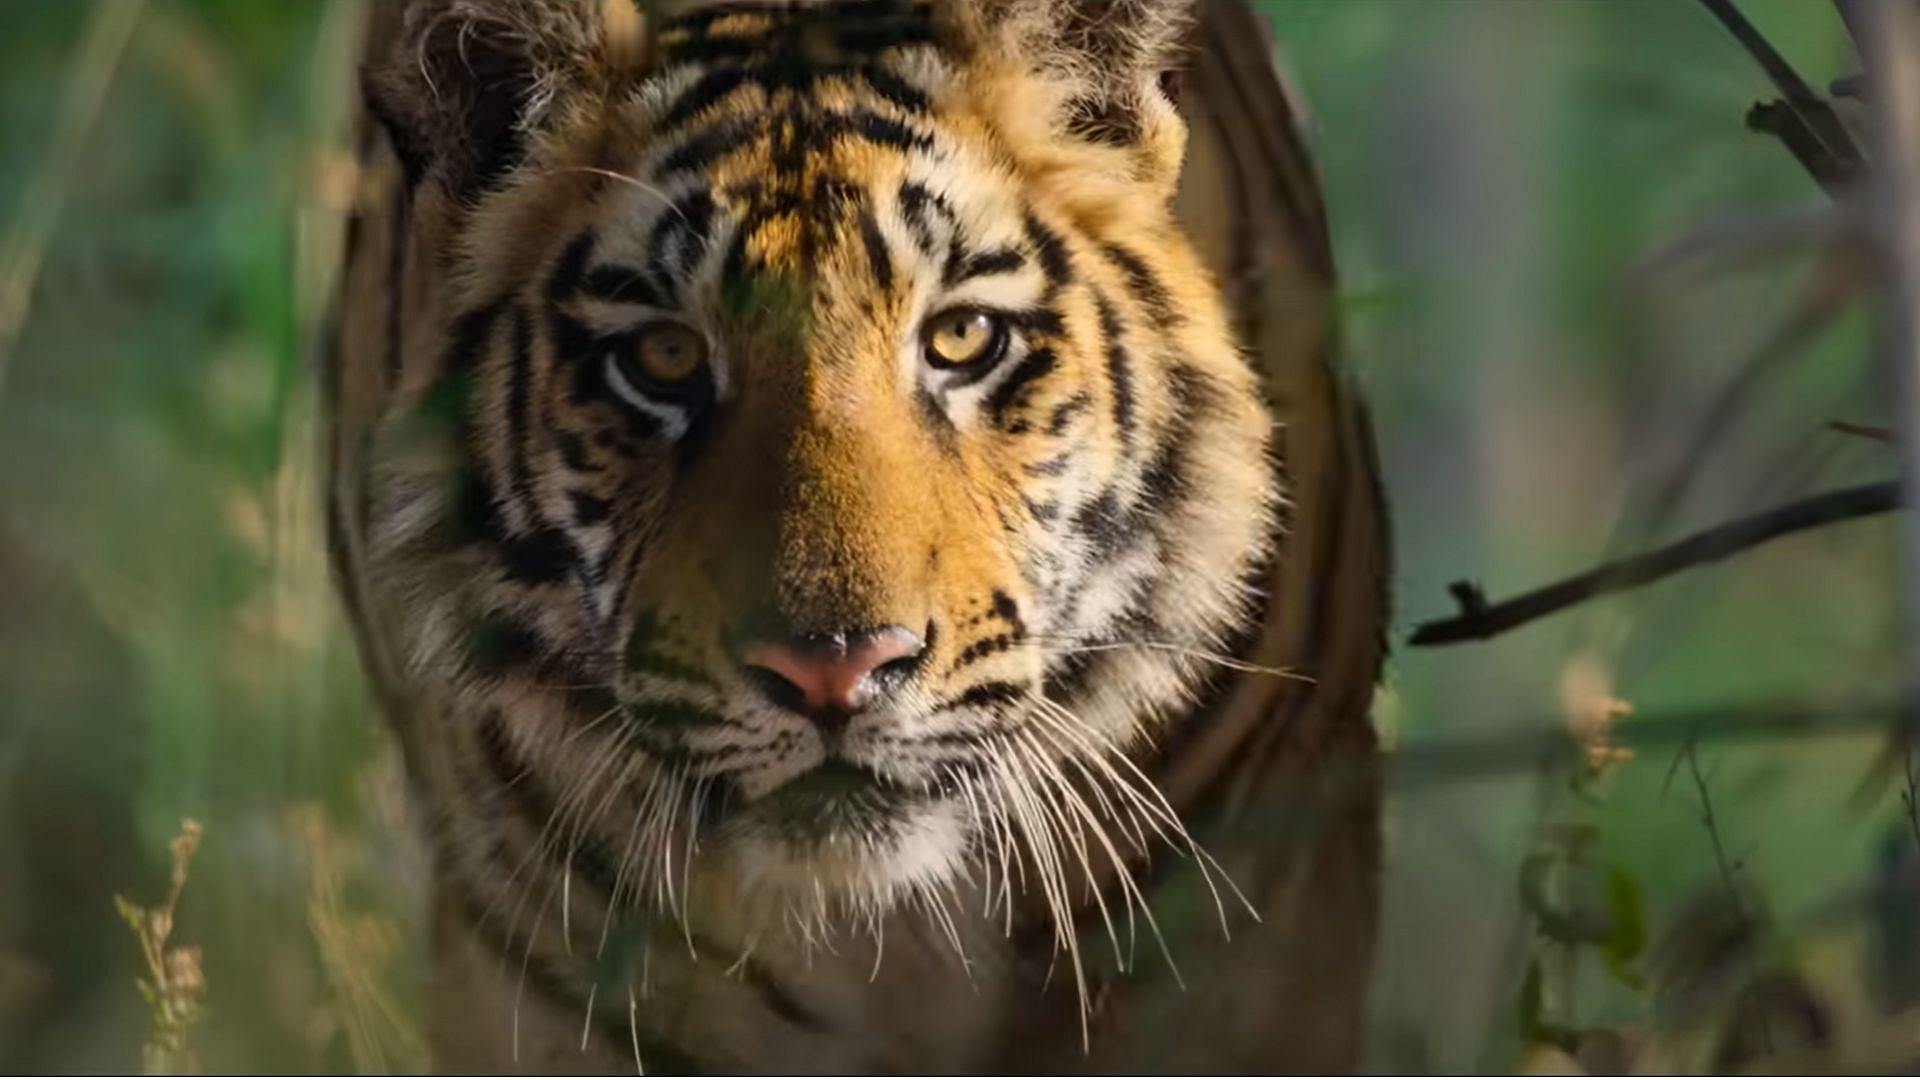 The tiger-human interaction is emphasized in the series (Image via YouTube@Disney)